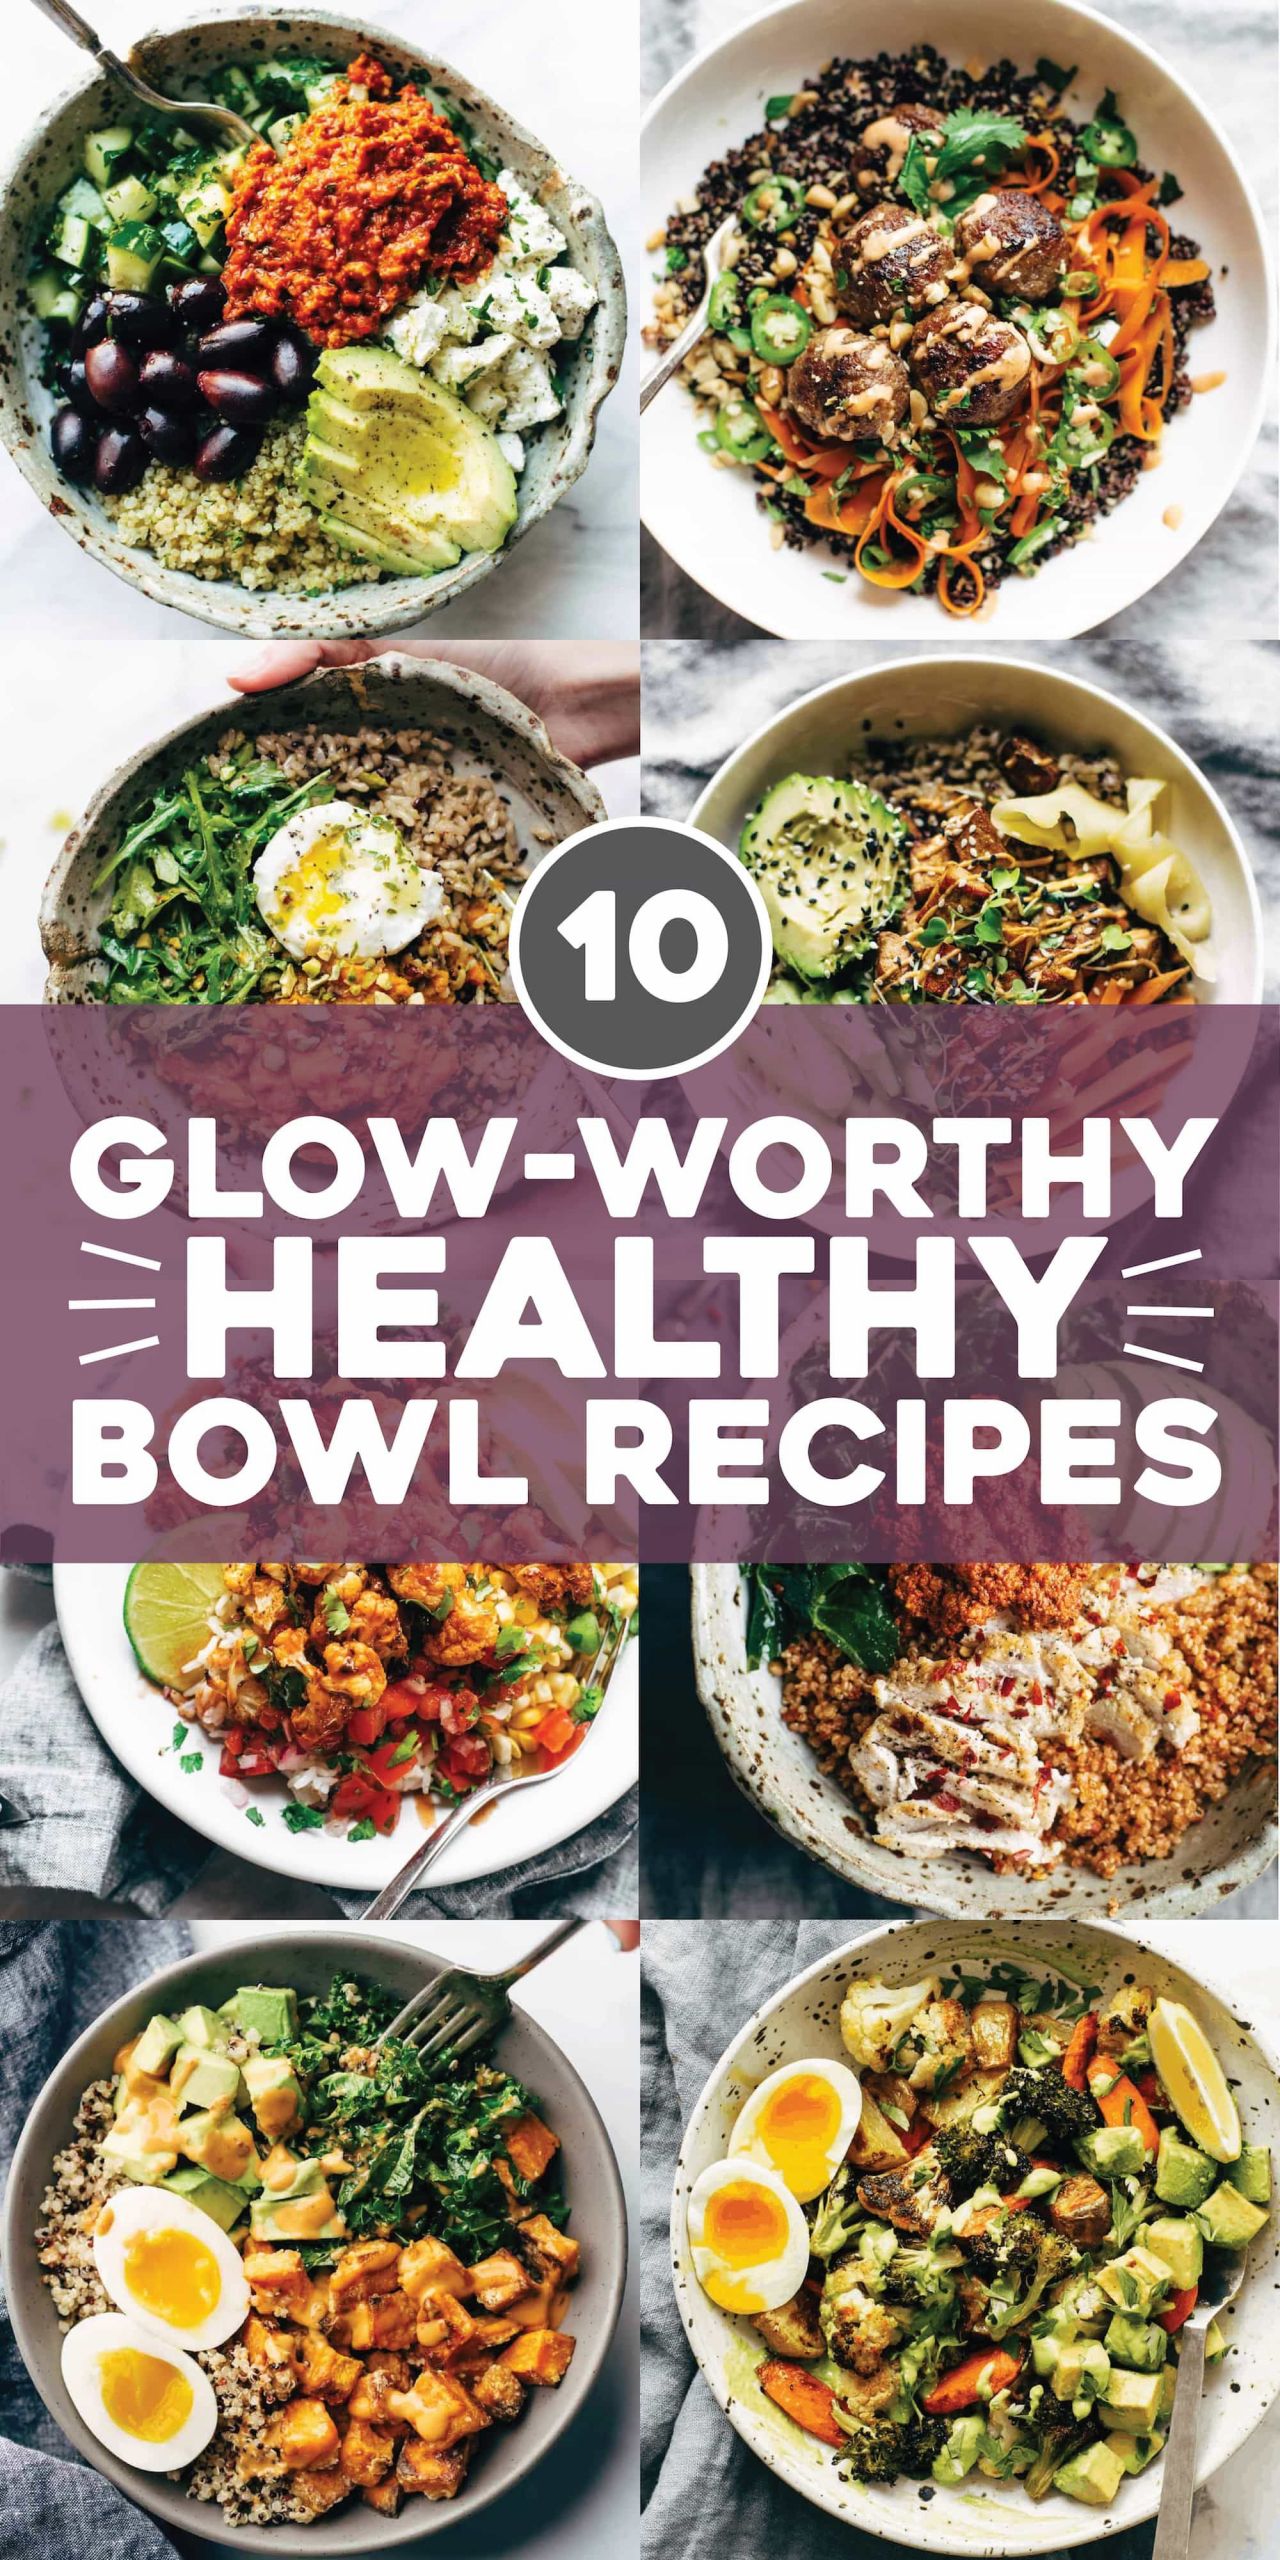 Clean Eating Super Bowl Recipes
 10 Best Healthy Bowl Recipes in 2020